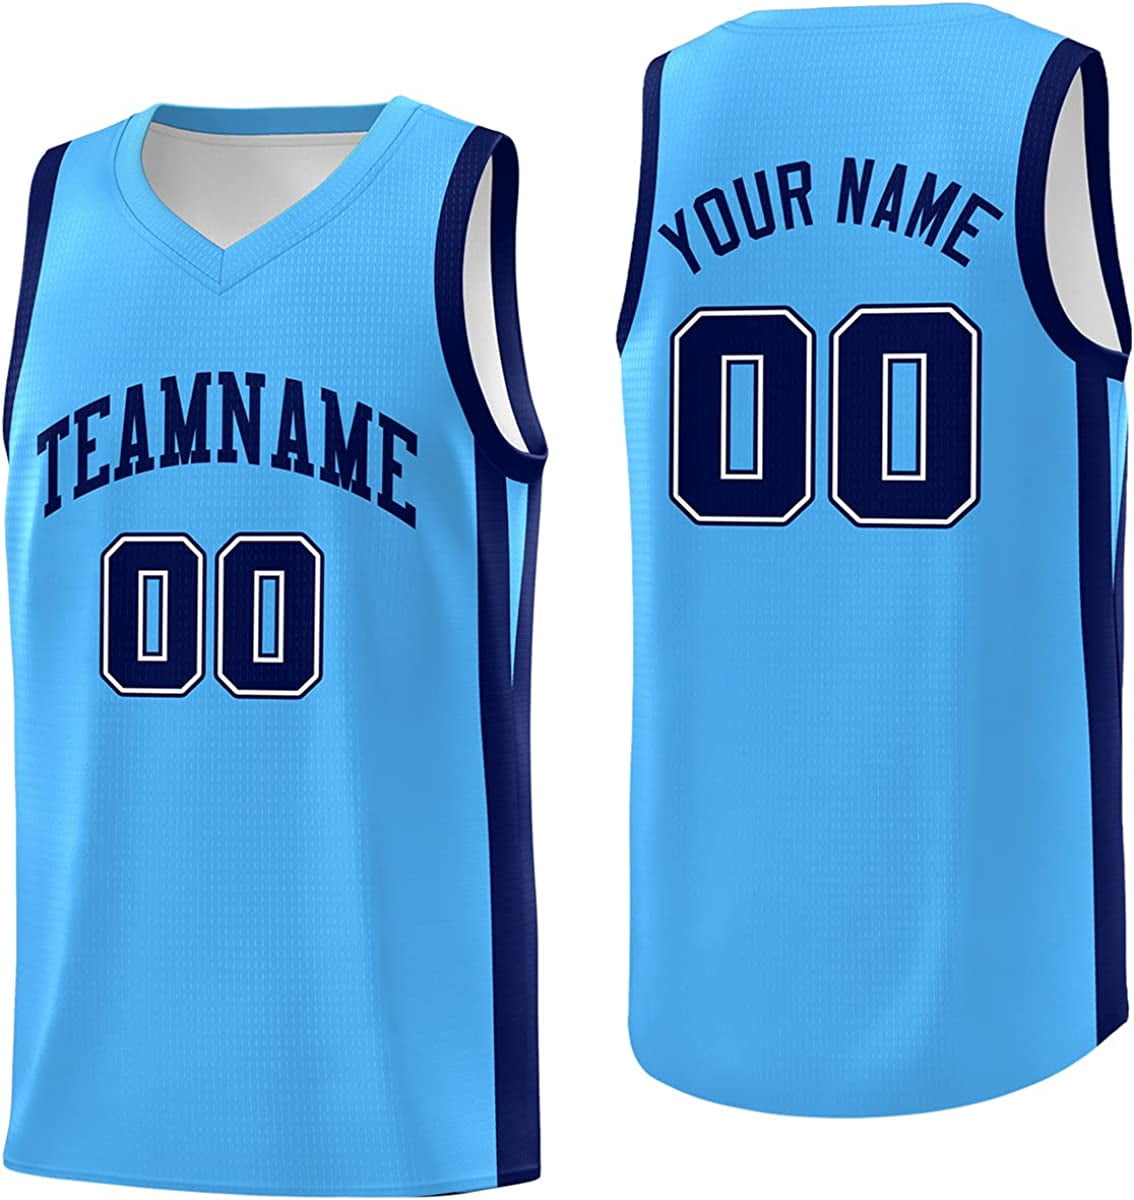 Custom Basketball Jersey for Men &Boy,Blank Athletic Uniform Personalized  Printed Team Name Number Logo 